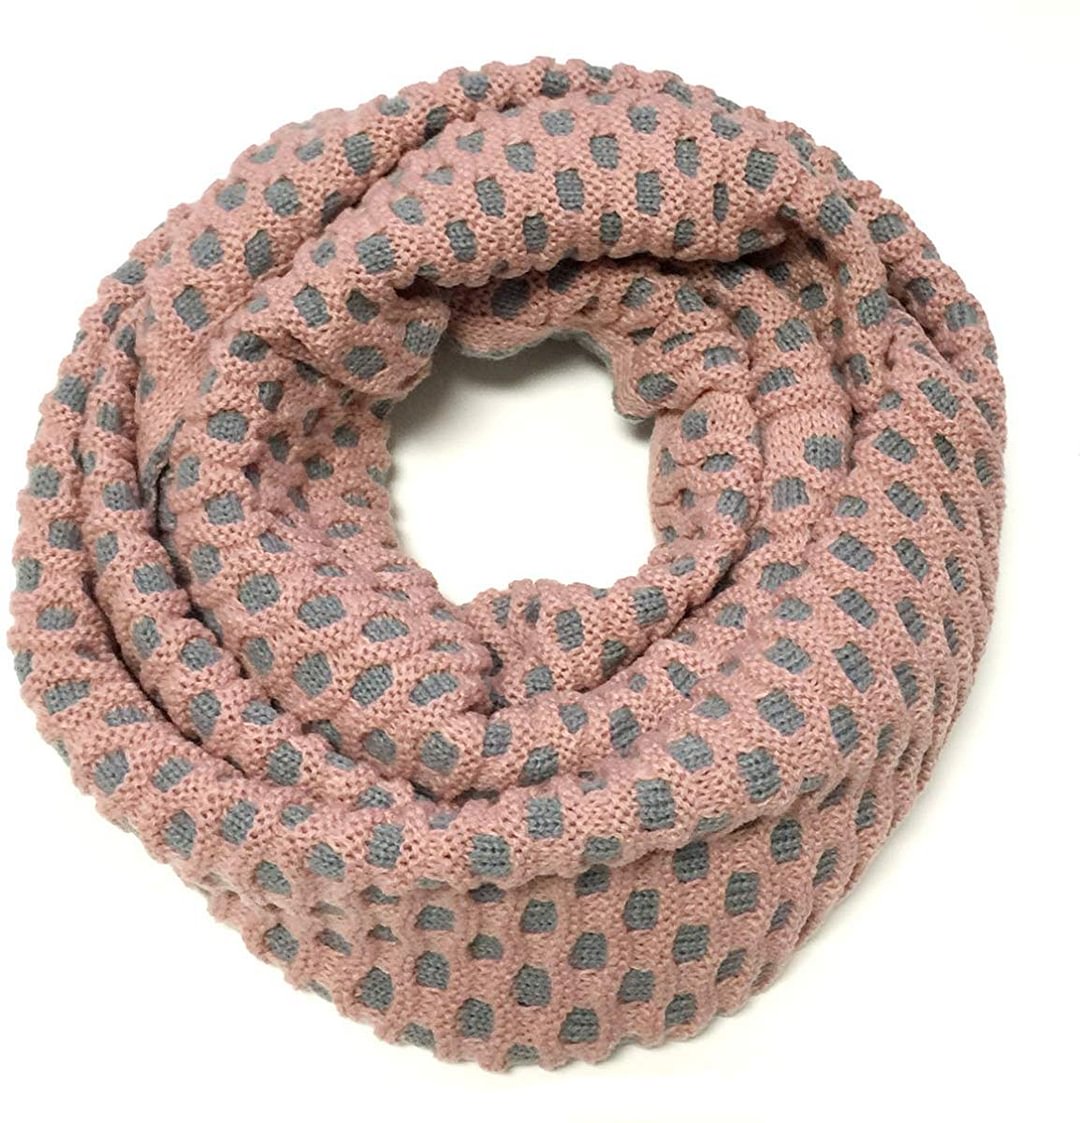 Winter Ribbed Knit Women's Plaid Print Infinity Scarf